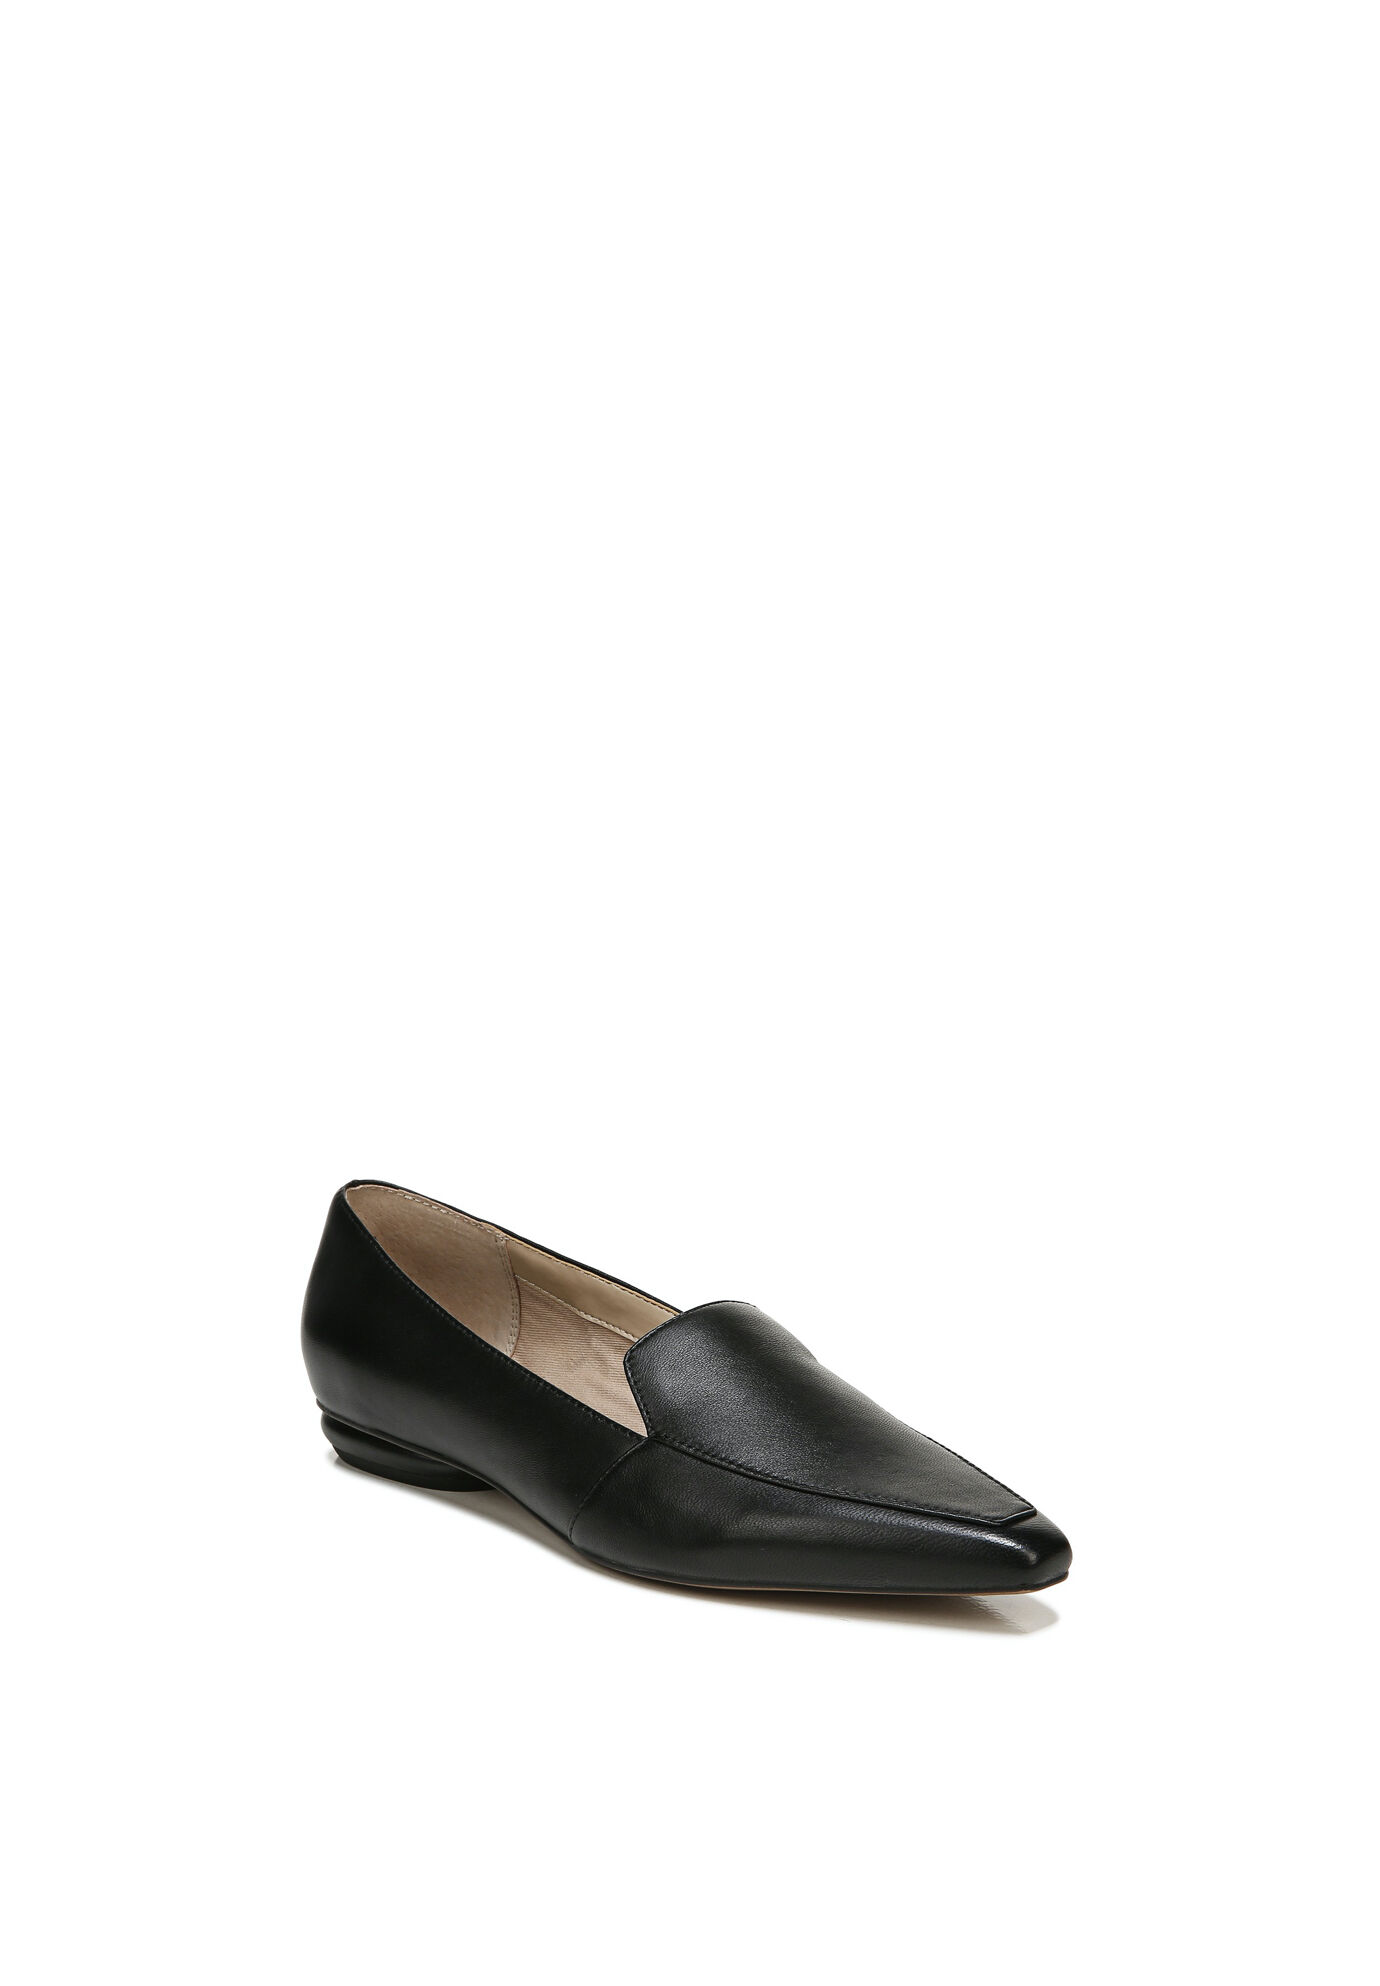 Women's Balica Loafers by Franco Sarto in Black (Size 8 1/2 M)